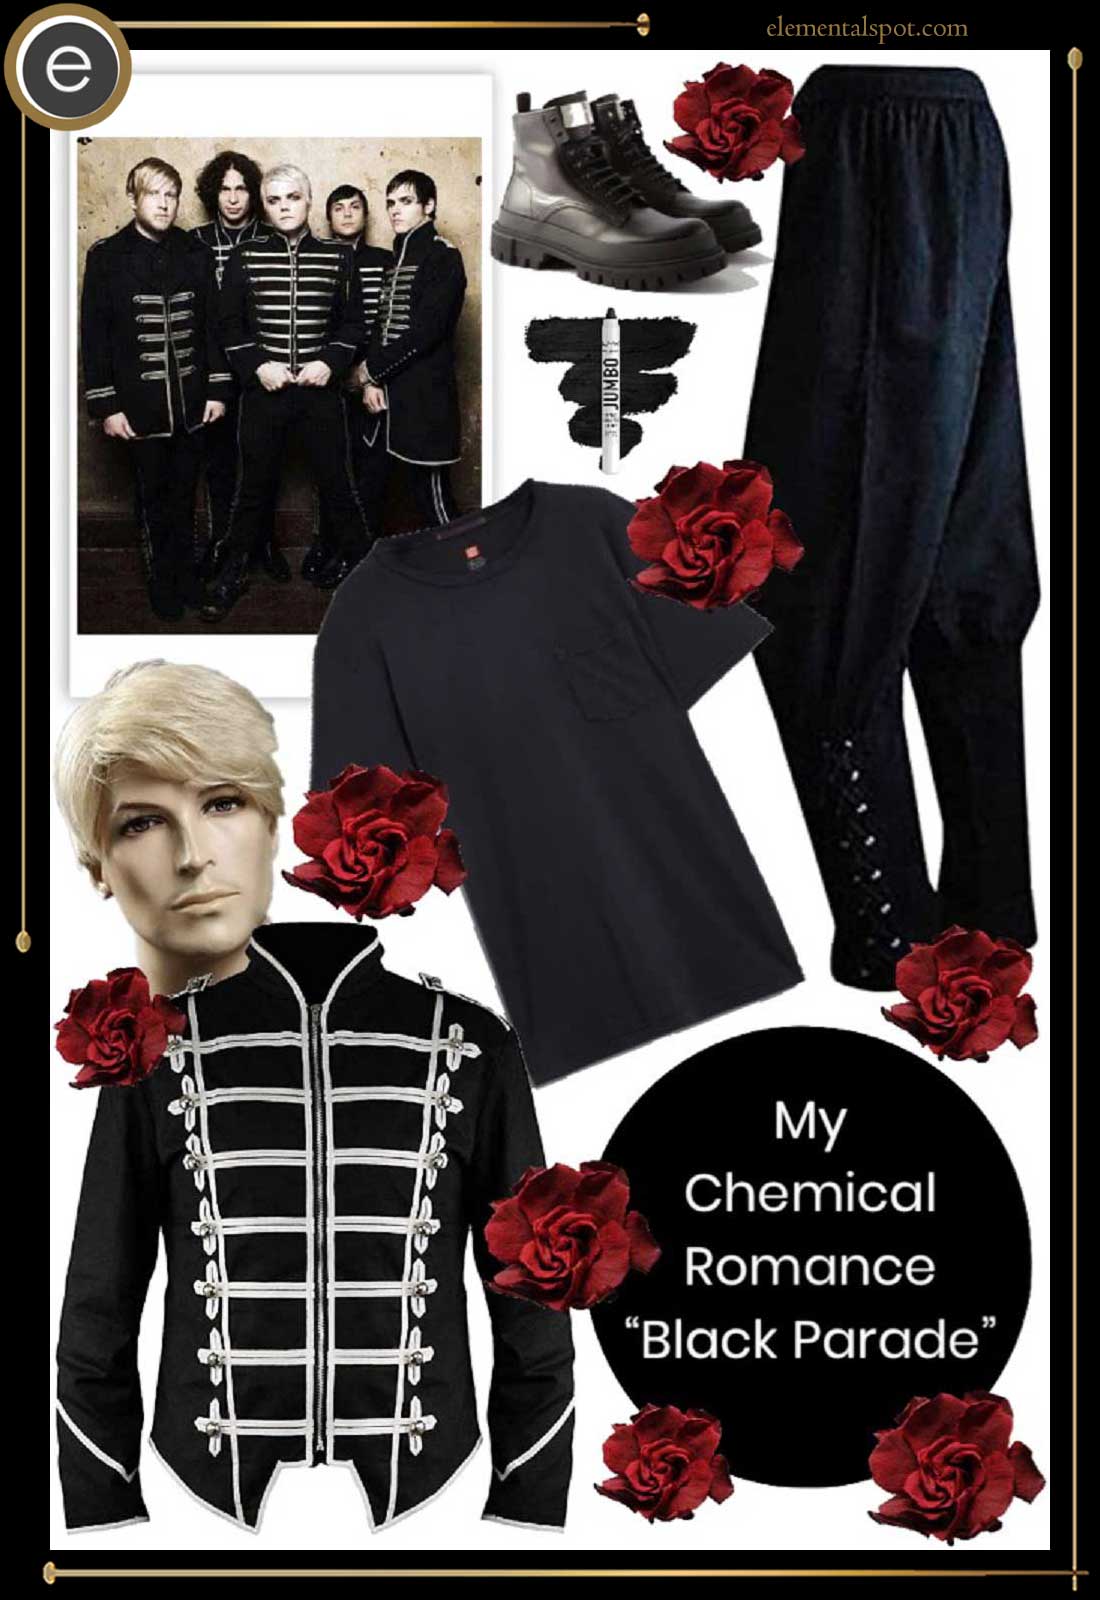 Dress Up Like My Chemical Romance from Black Parade - Elemental Spot